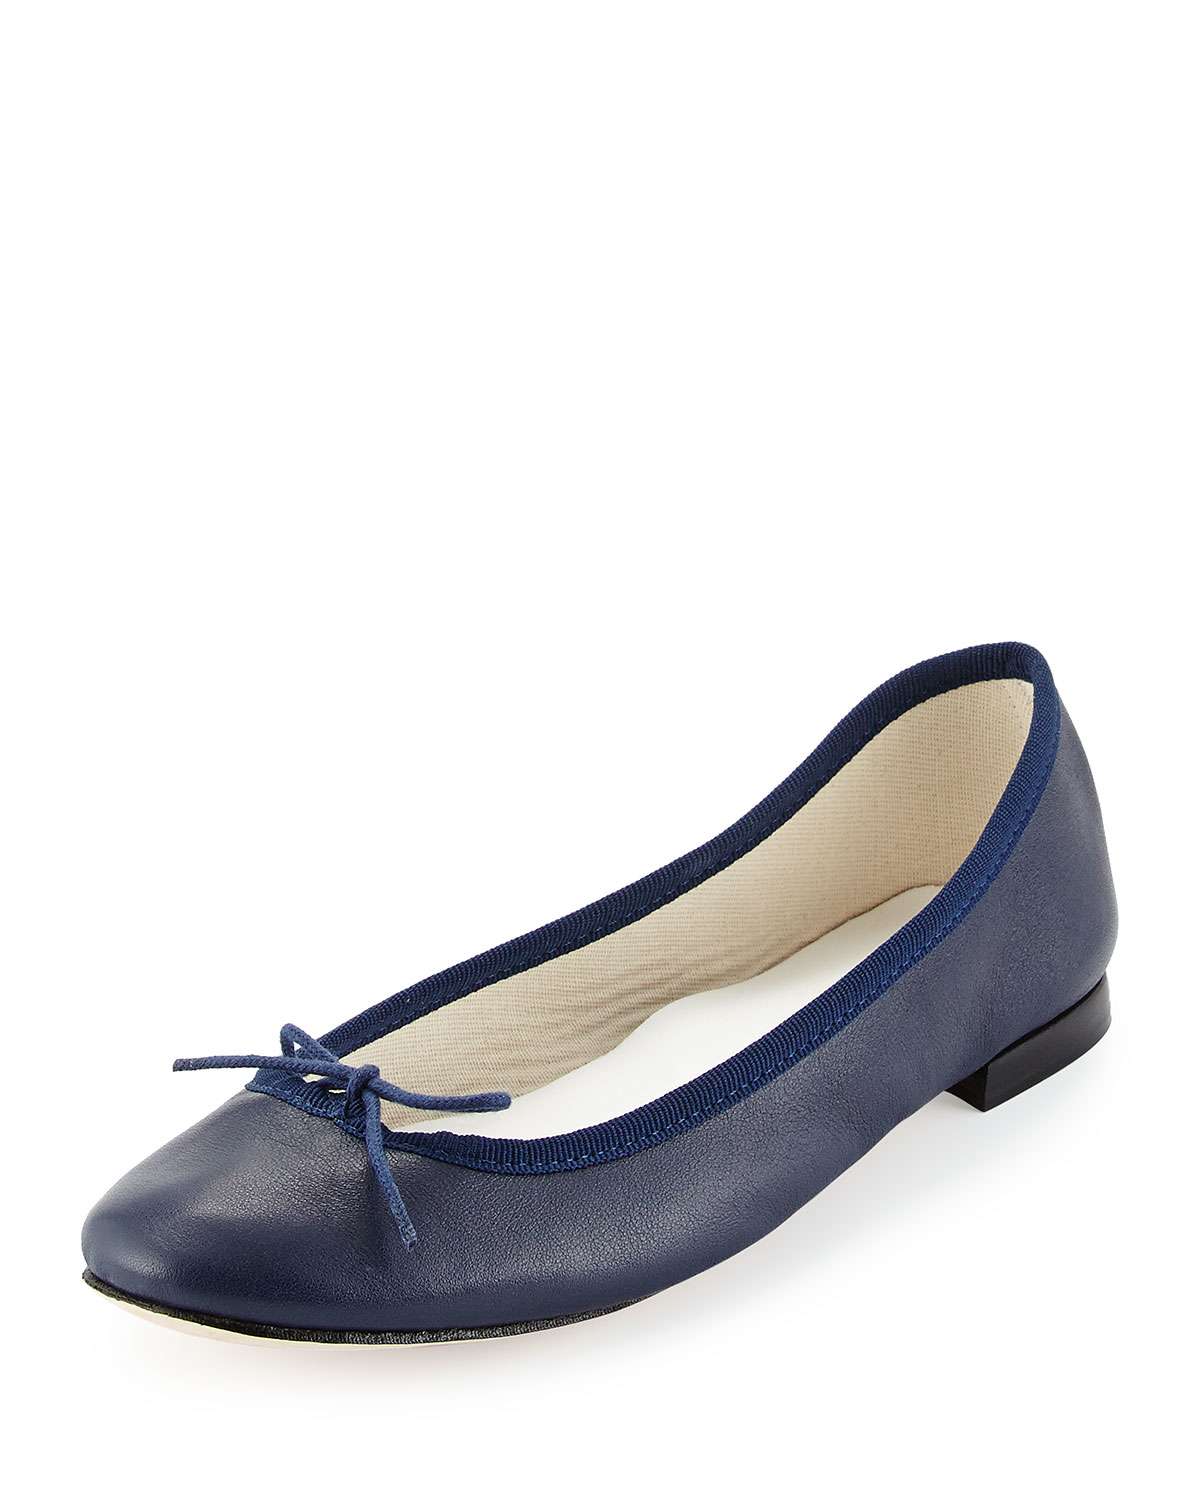 Repetto Camille Bow Leather Ballet Flats in Blue | Lyst